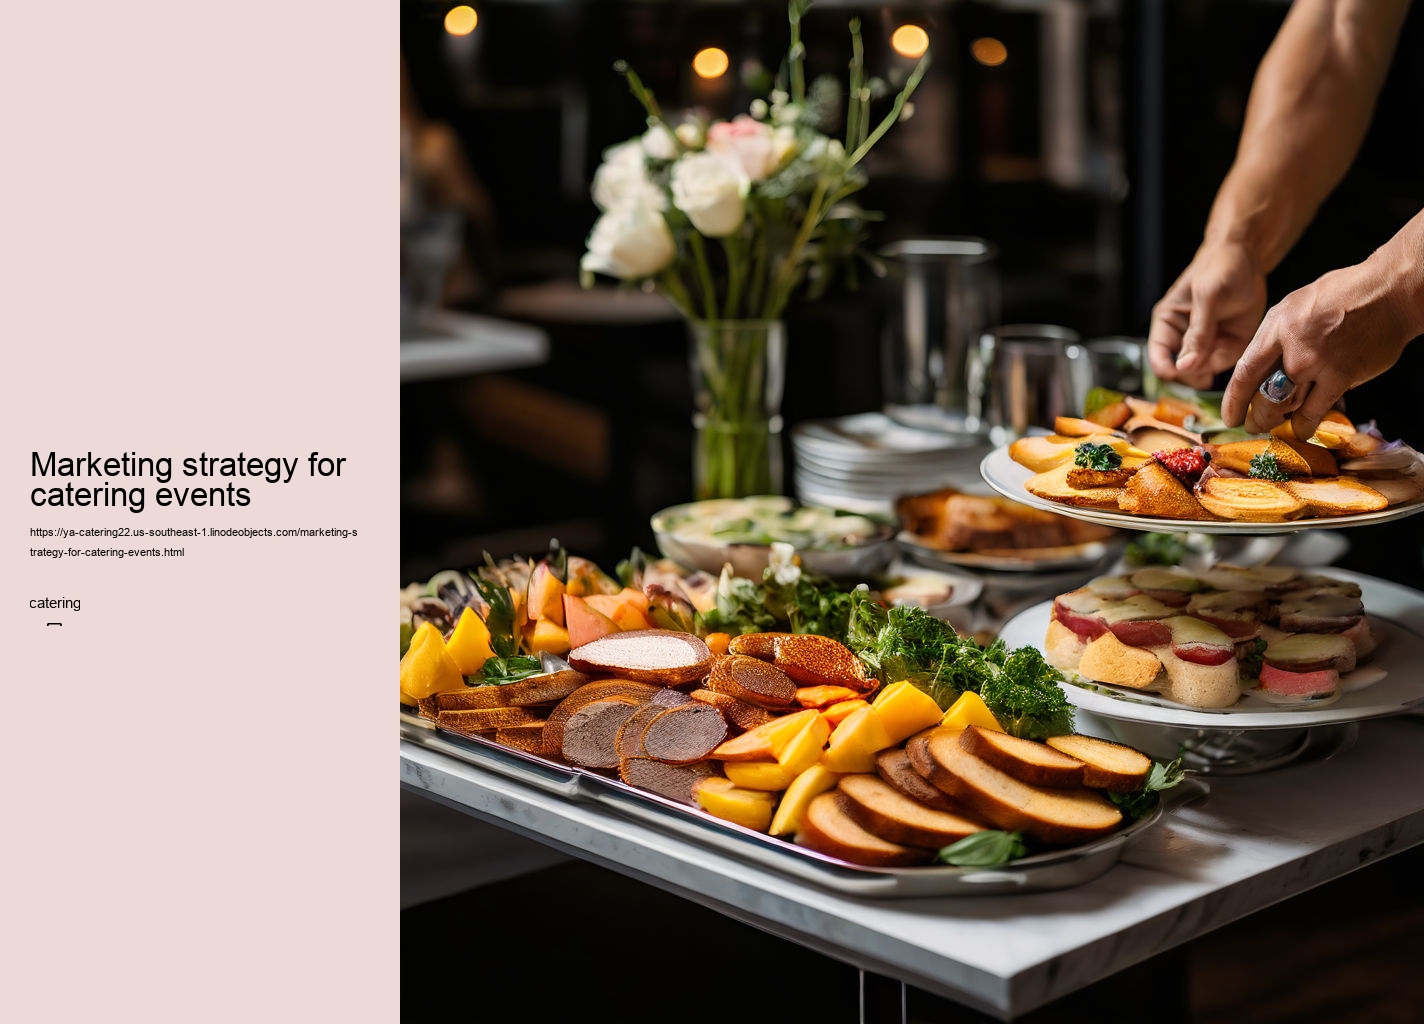 Marketing strategy for catering events